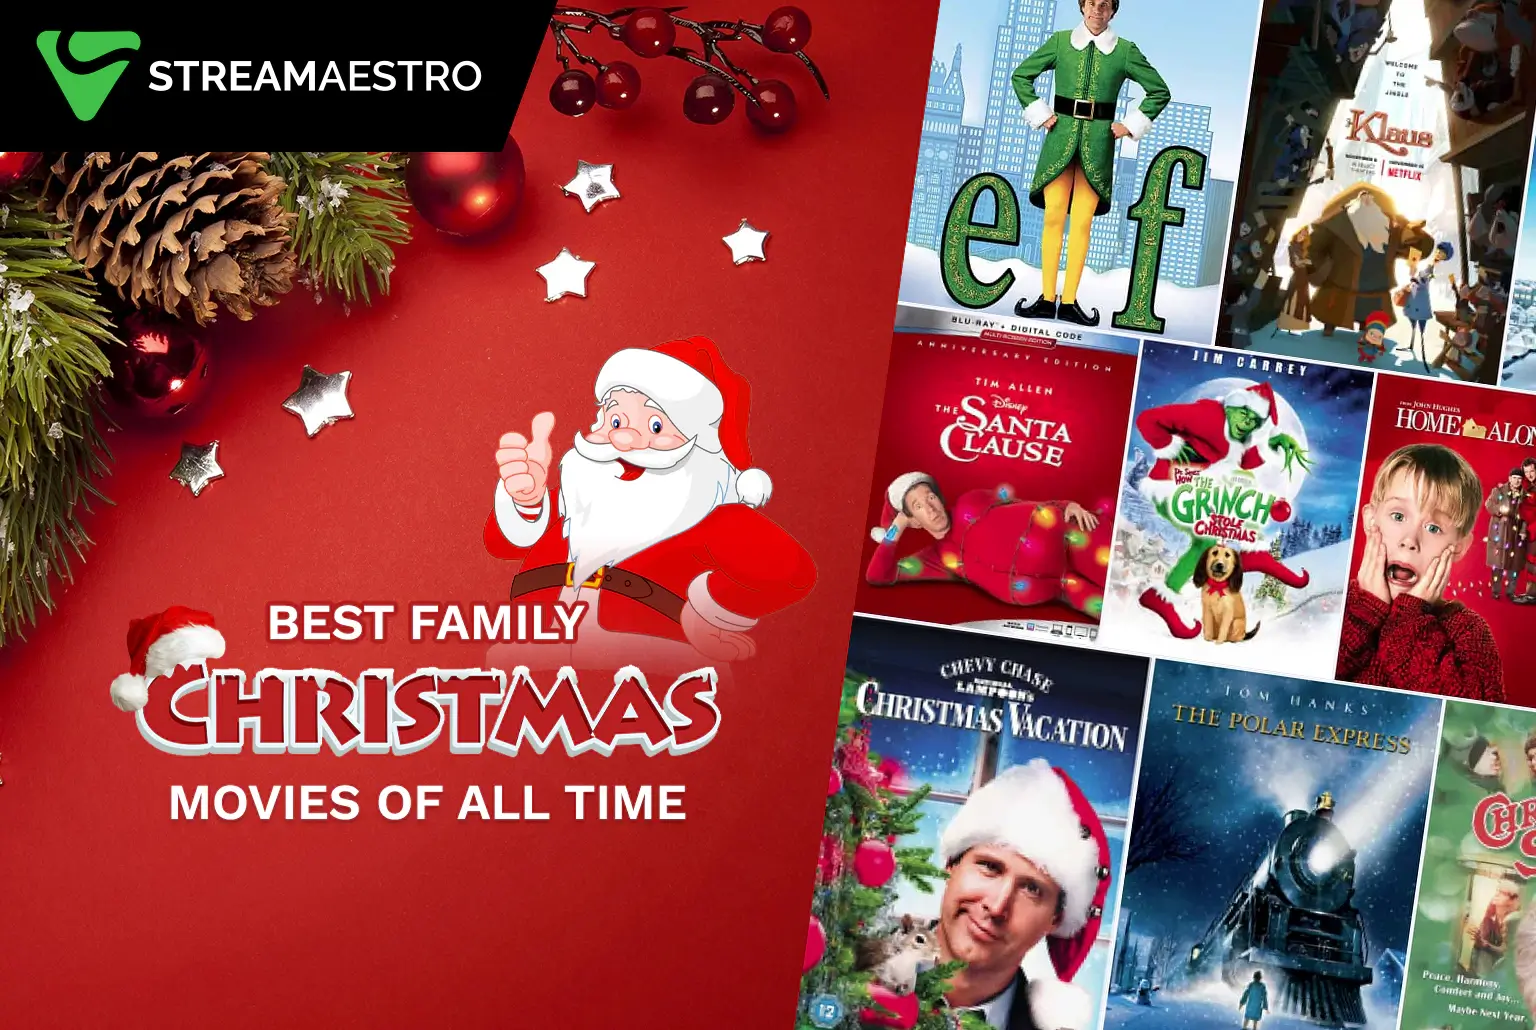 Best Family Christmas Movies of All Time